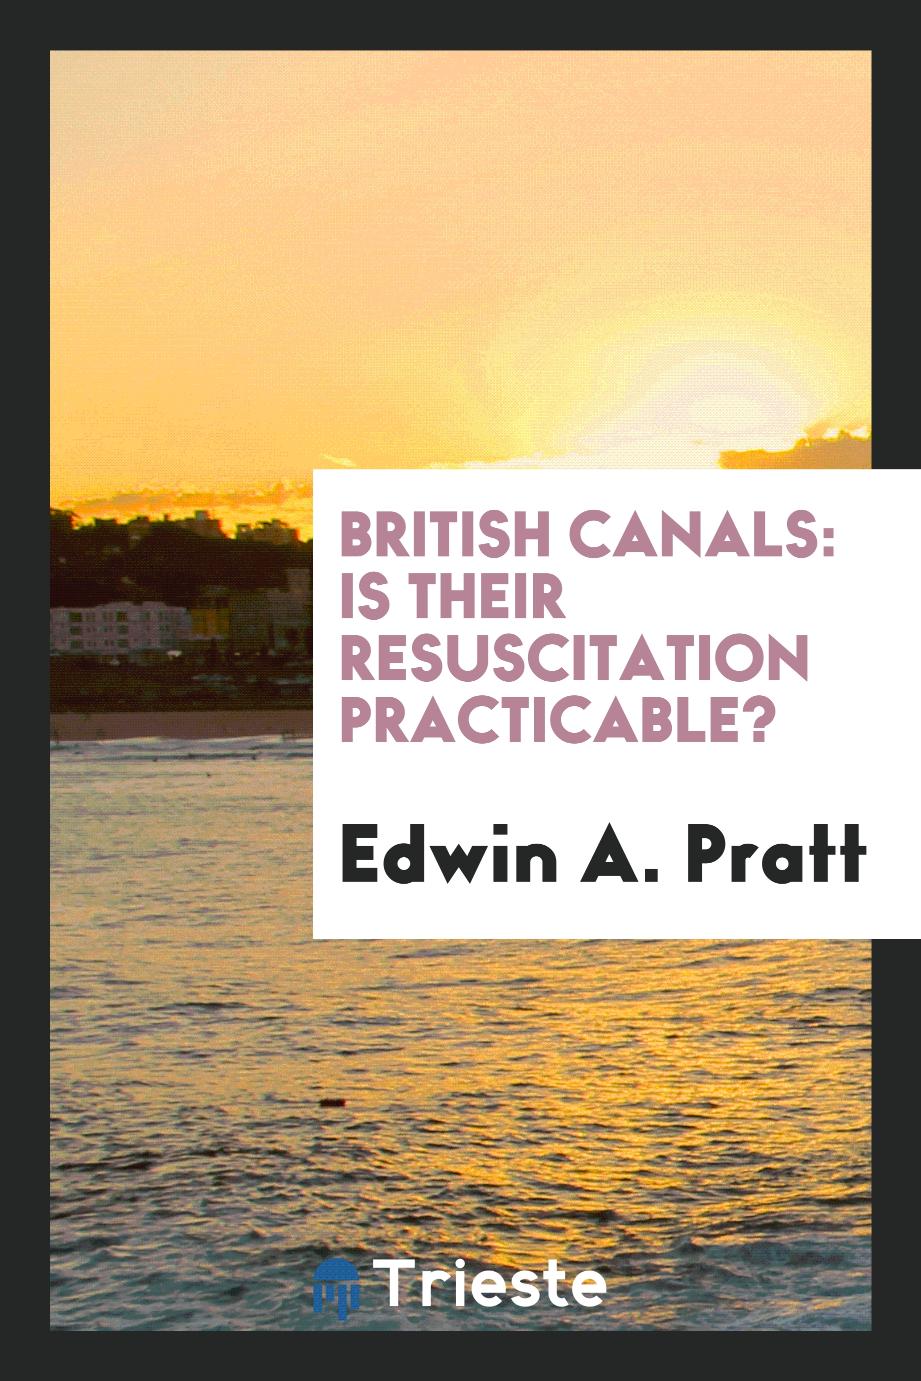 British Canals: Is Their Resuscitation Practicable?